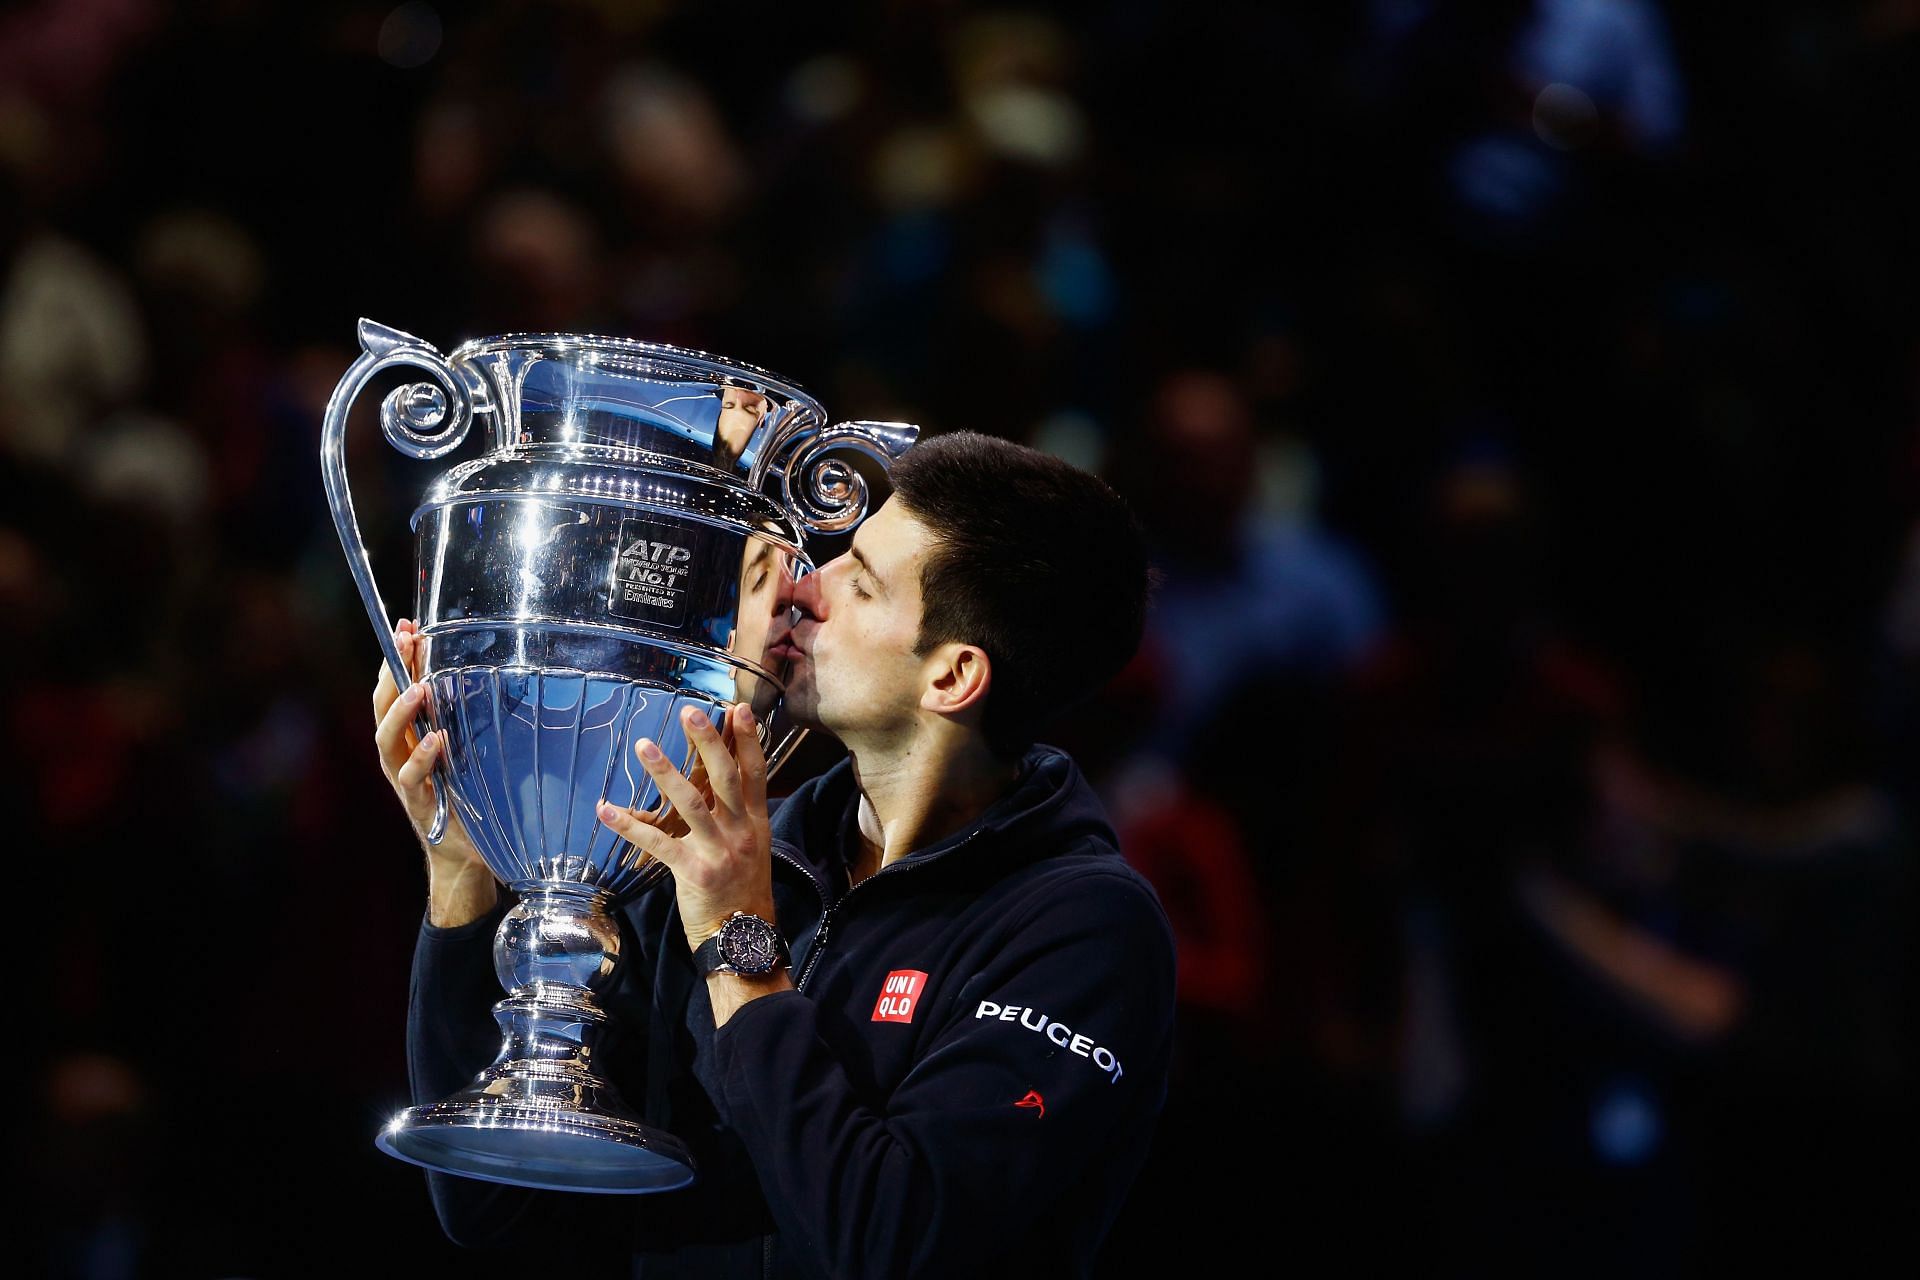 Novak Djokovic has spent more than seven years as the World No. 1 ranked player